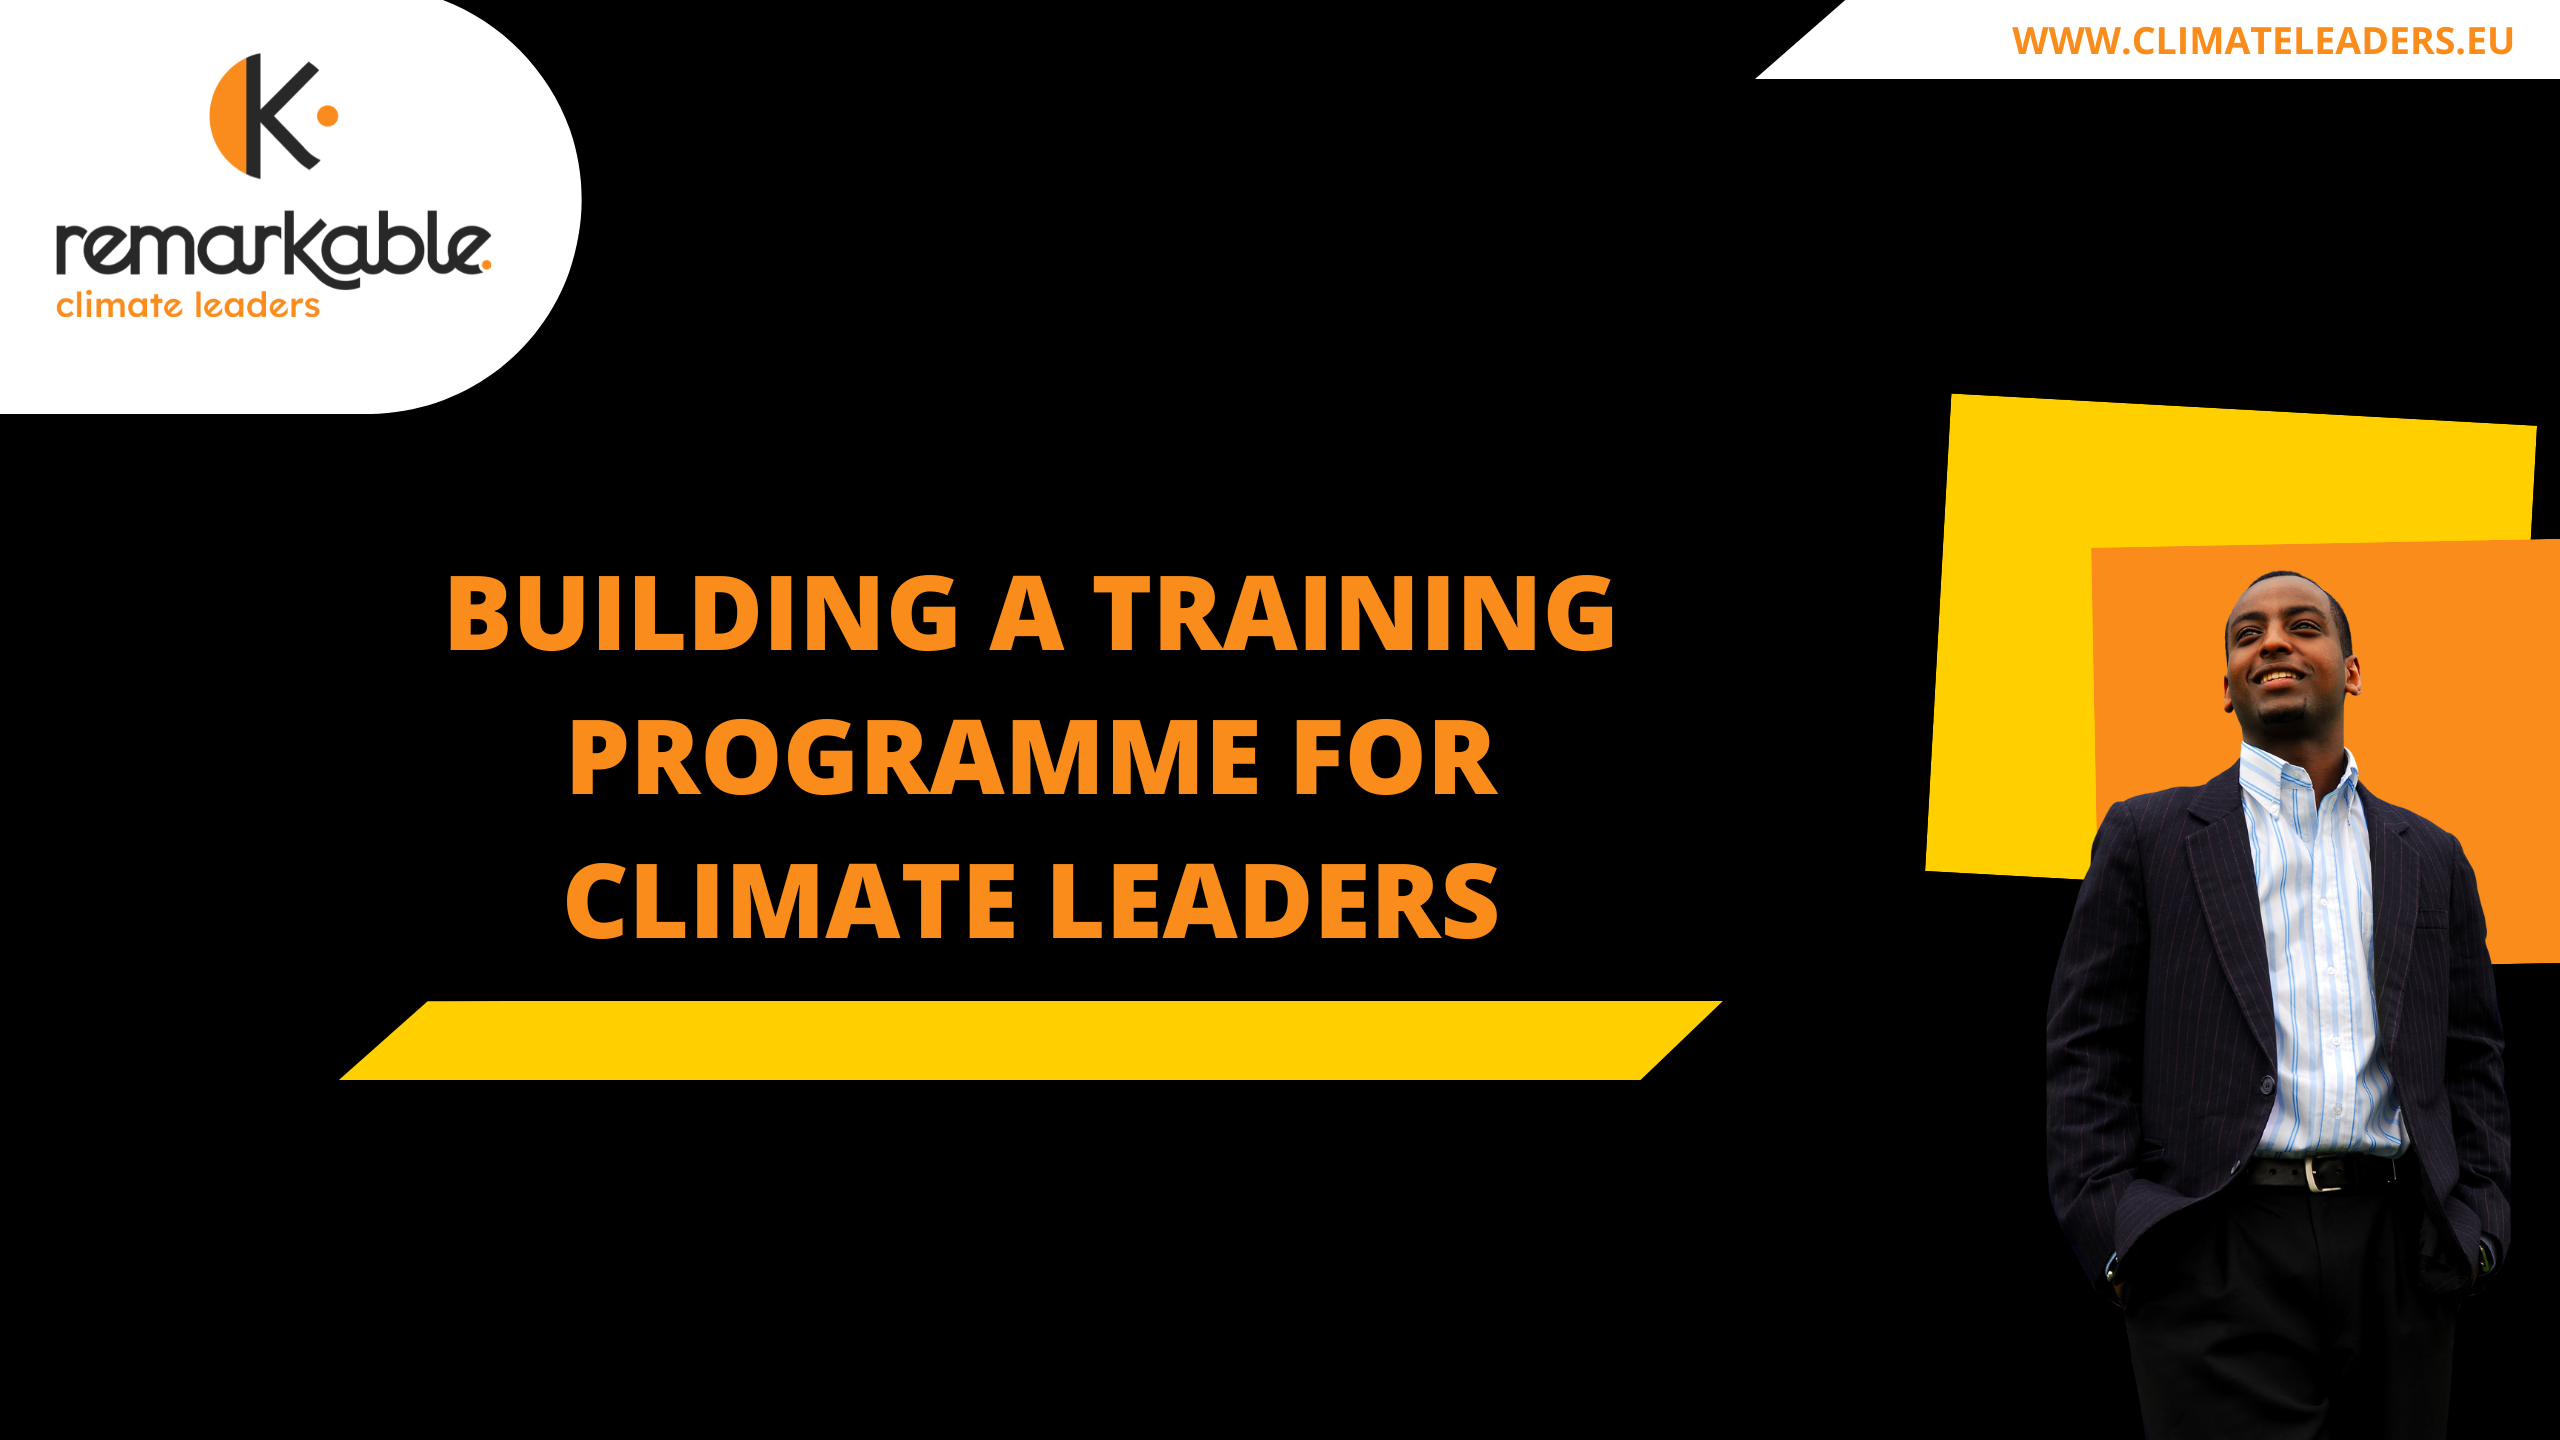 How to build a training programme for climate leaders